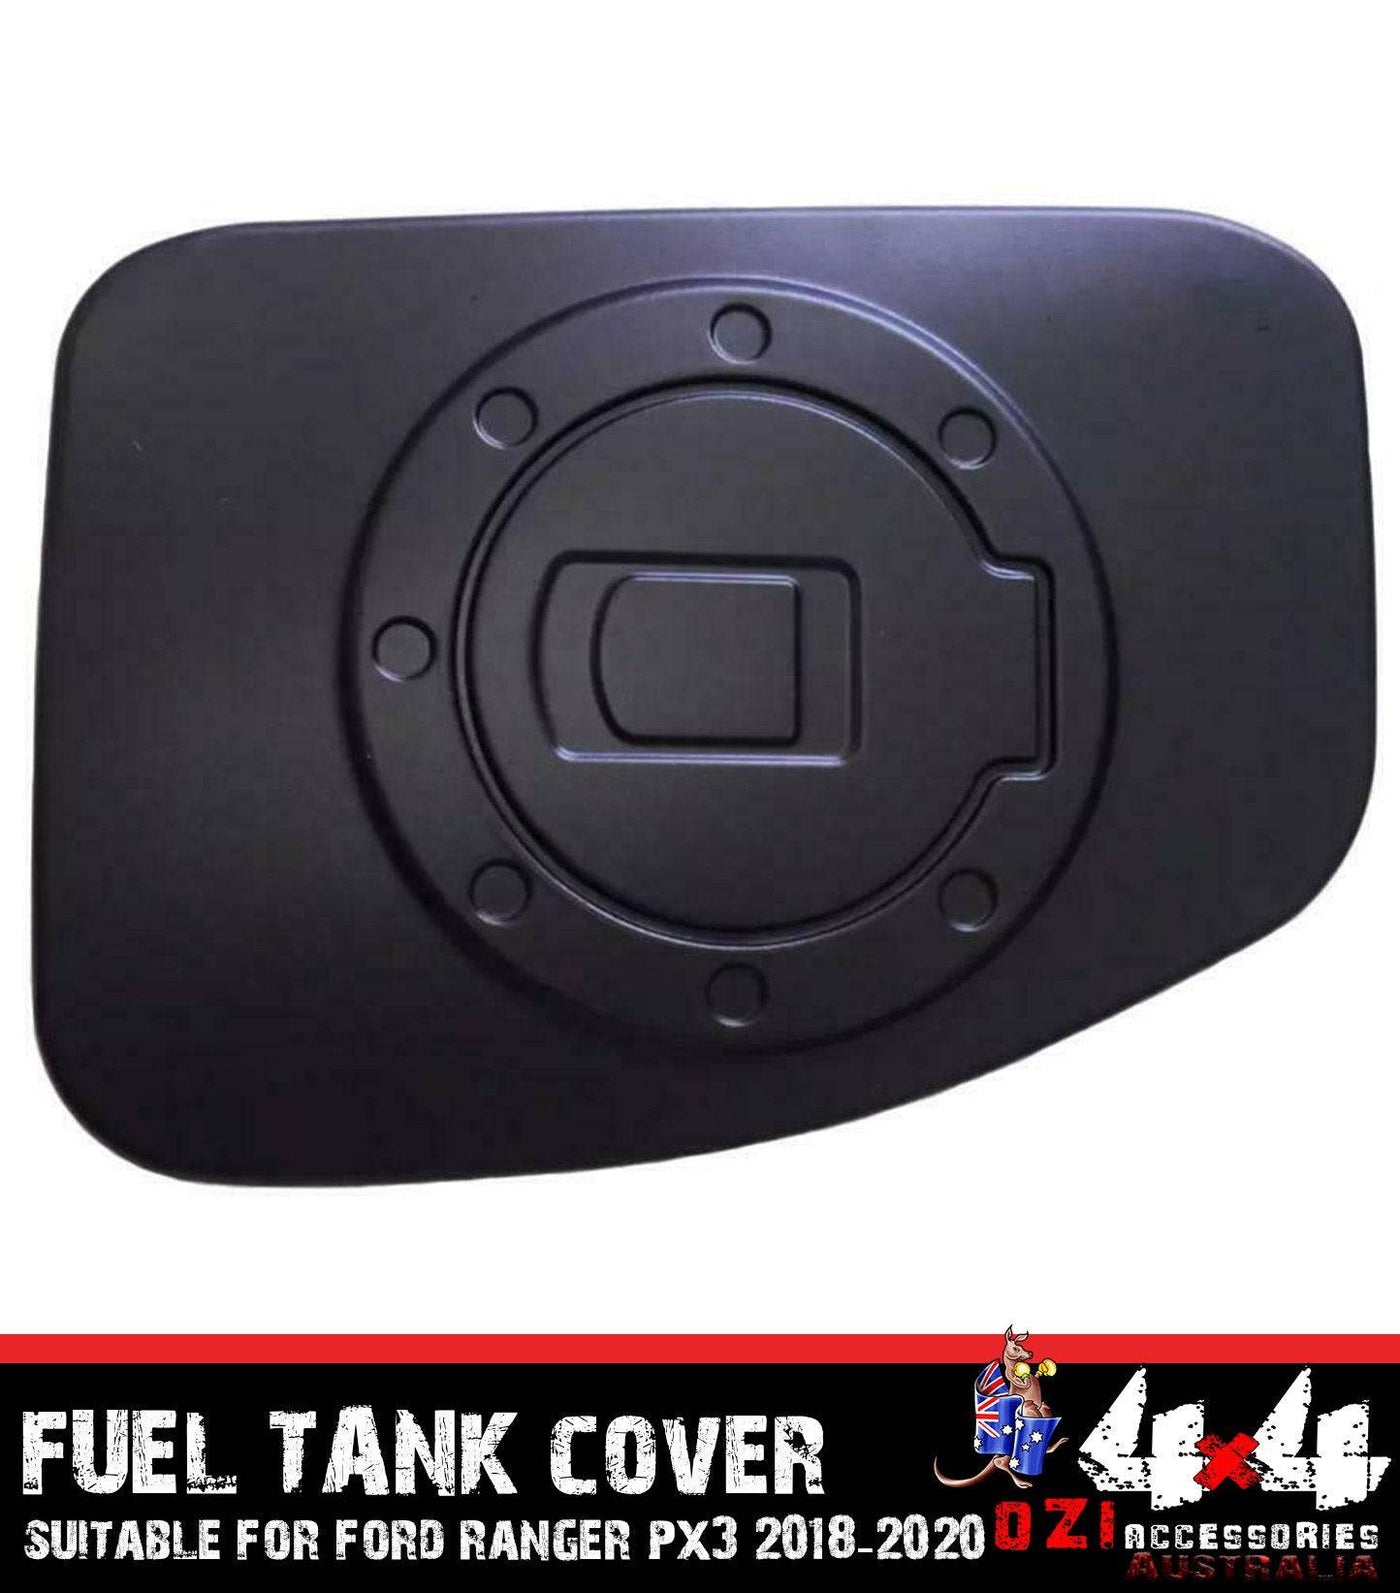 Gas Tank Cover Suits Ford Ranger PX3 2018-2020